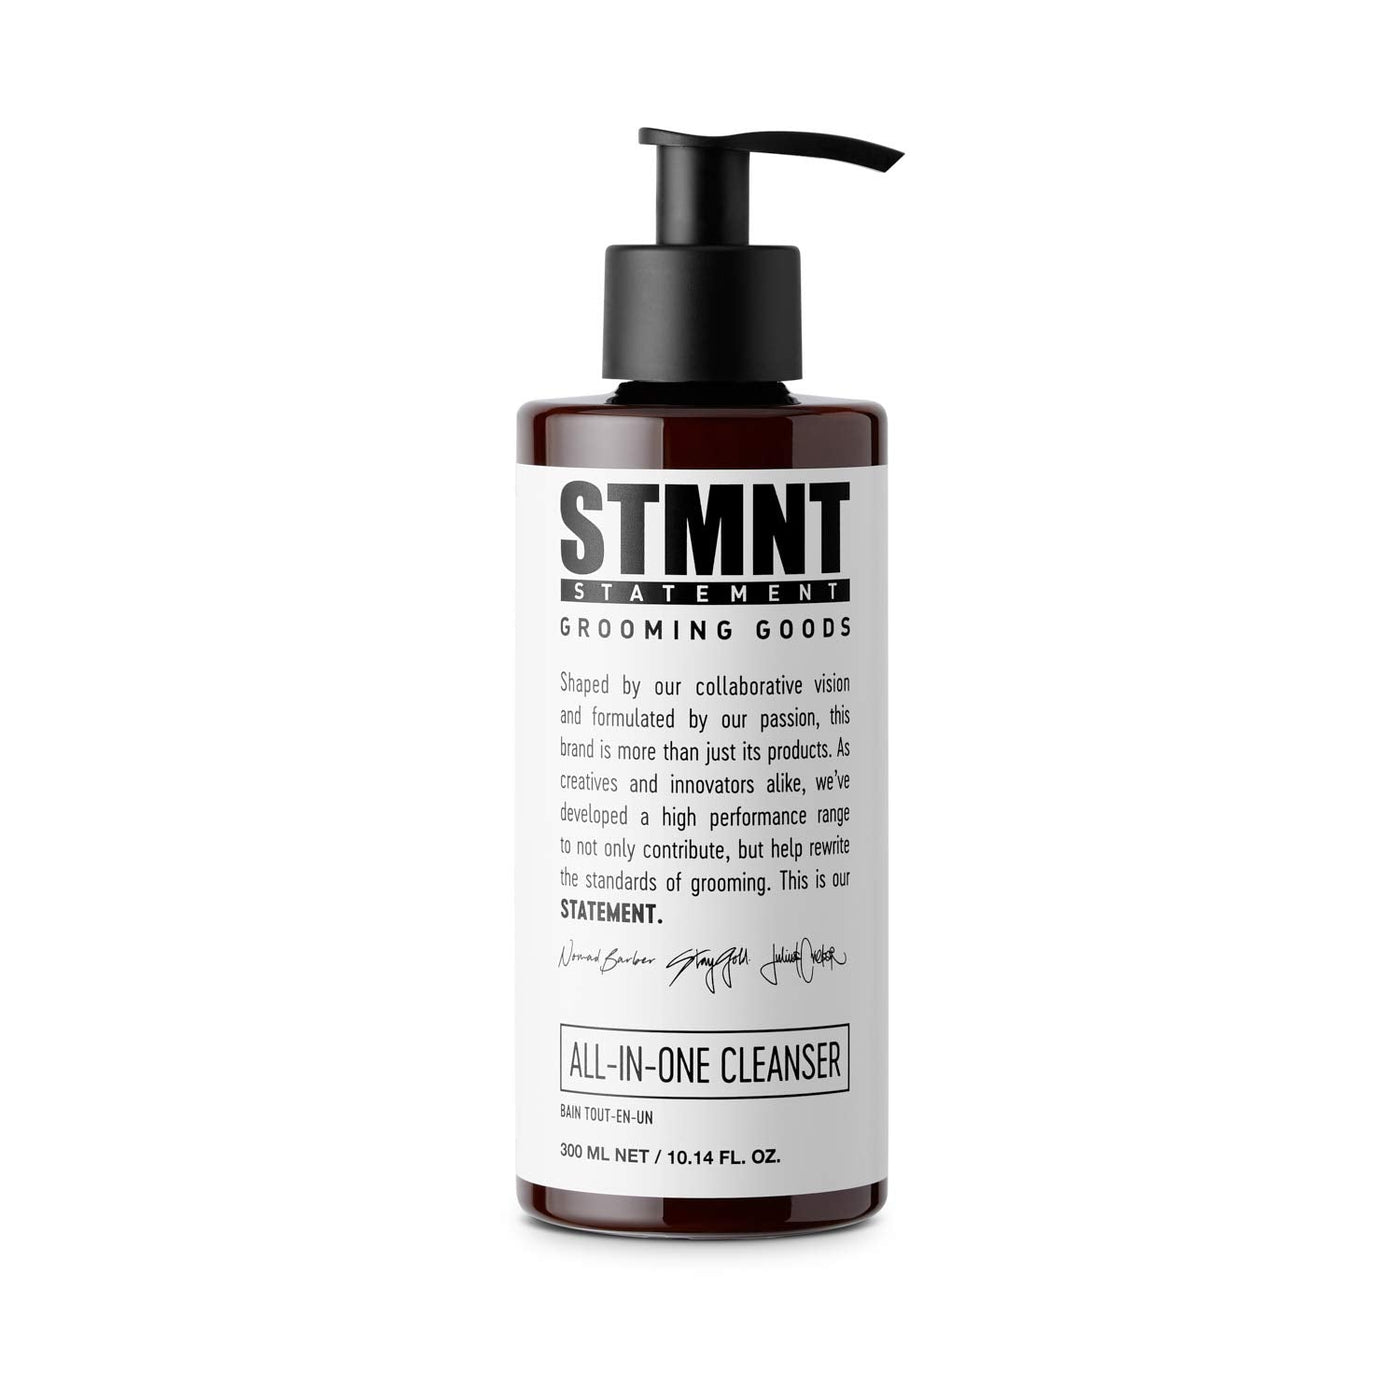 STMNT Grooming Goods All-In-One Cleanser (300ml) 1